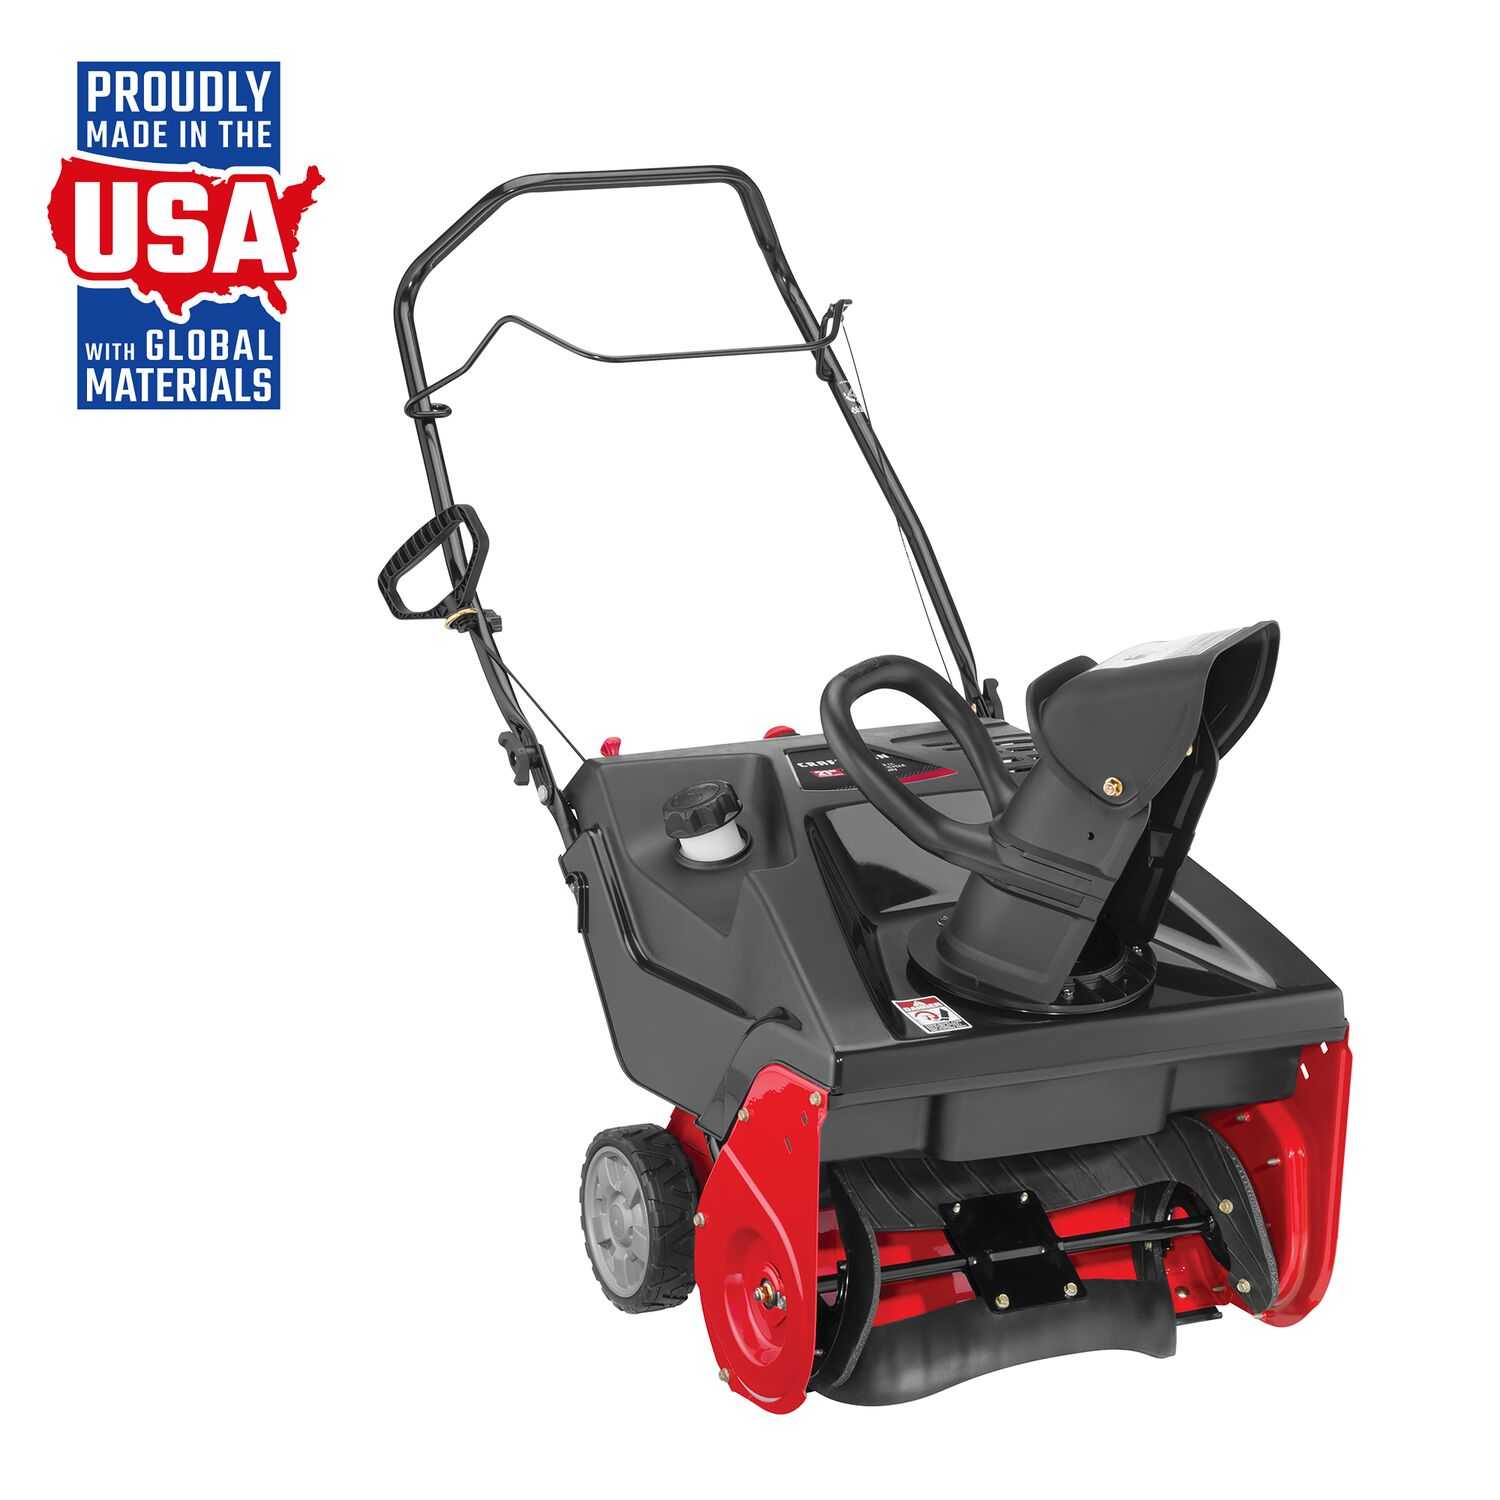 CRAFTSMAN SB230 21-in Single-stage Push with Auger Assistance Gas Snow Blower | CMXGBAM1054539